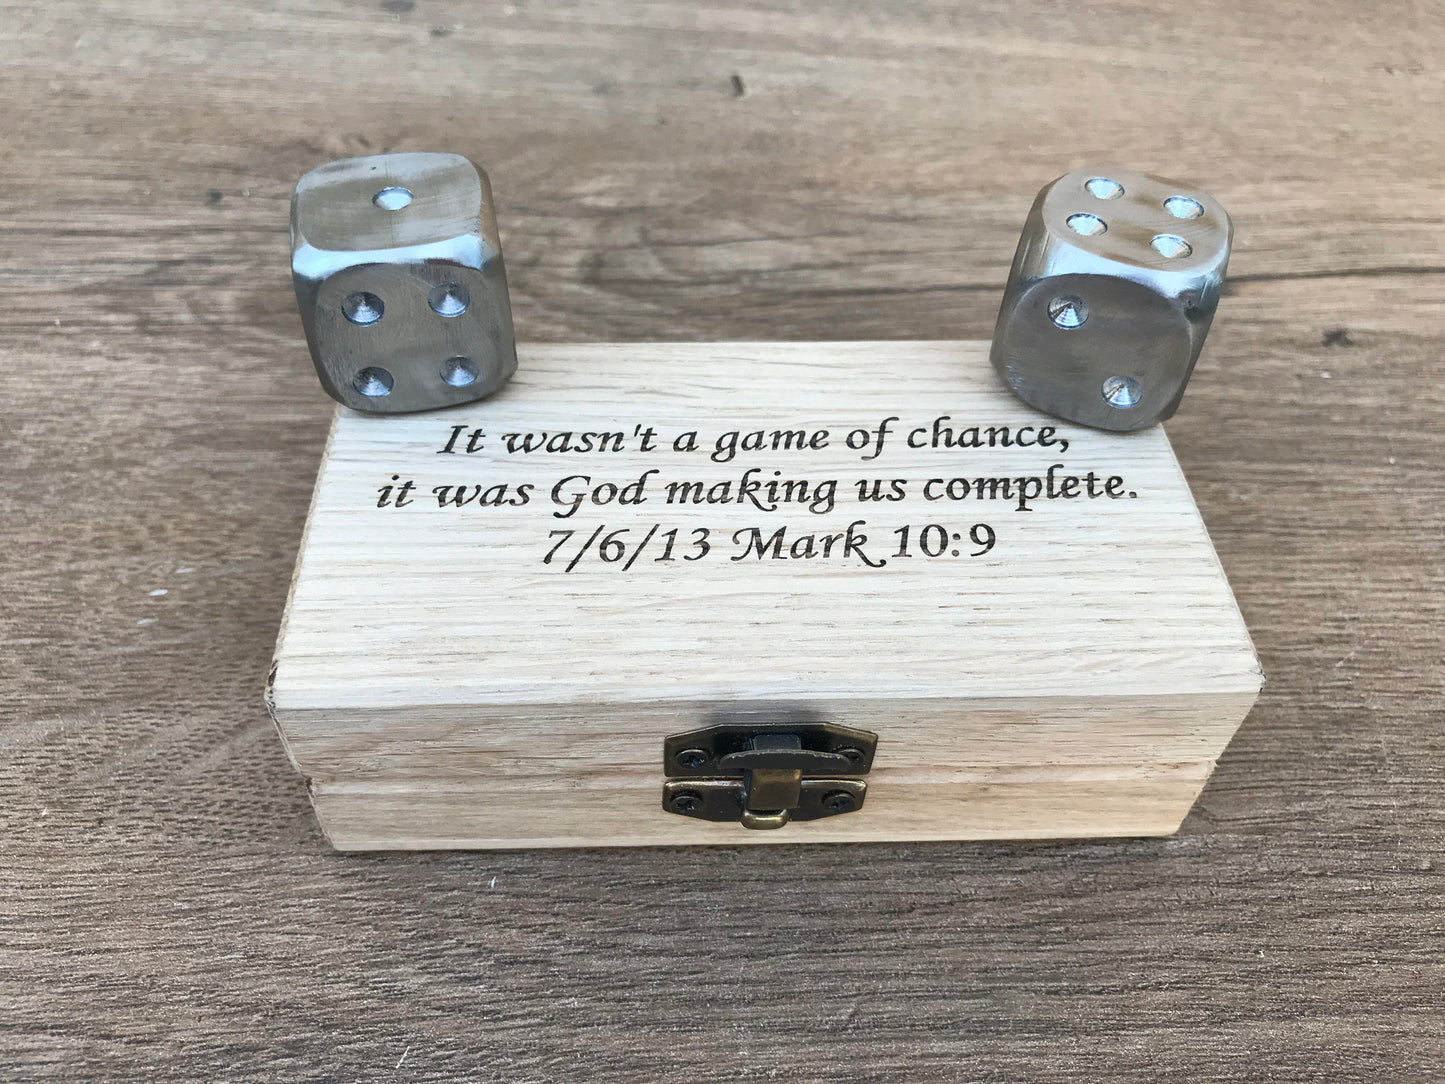 11th anniversary, steel anniversary, stainless steel dices, steel dices, steel gift, steel anniversary gift, dice,tabletop games,gaming gift